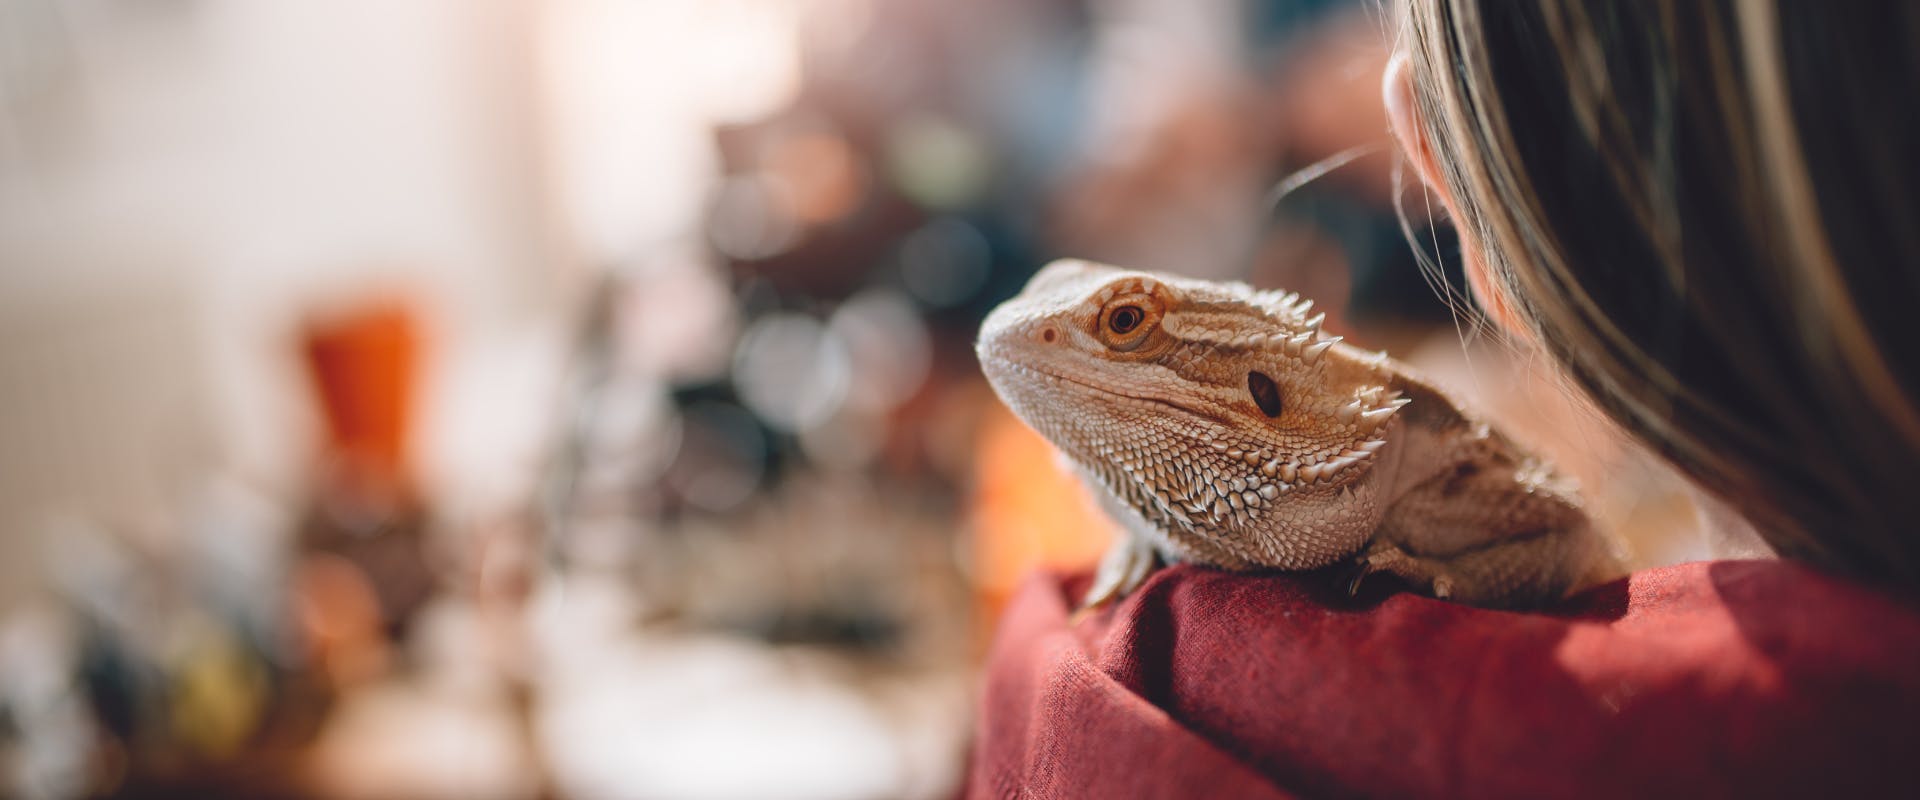 a bearded dragon perched on the shoulder of someone wearing a red hoodie